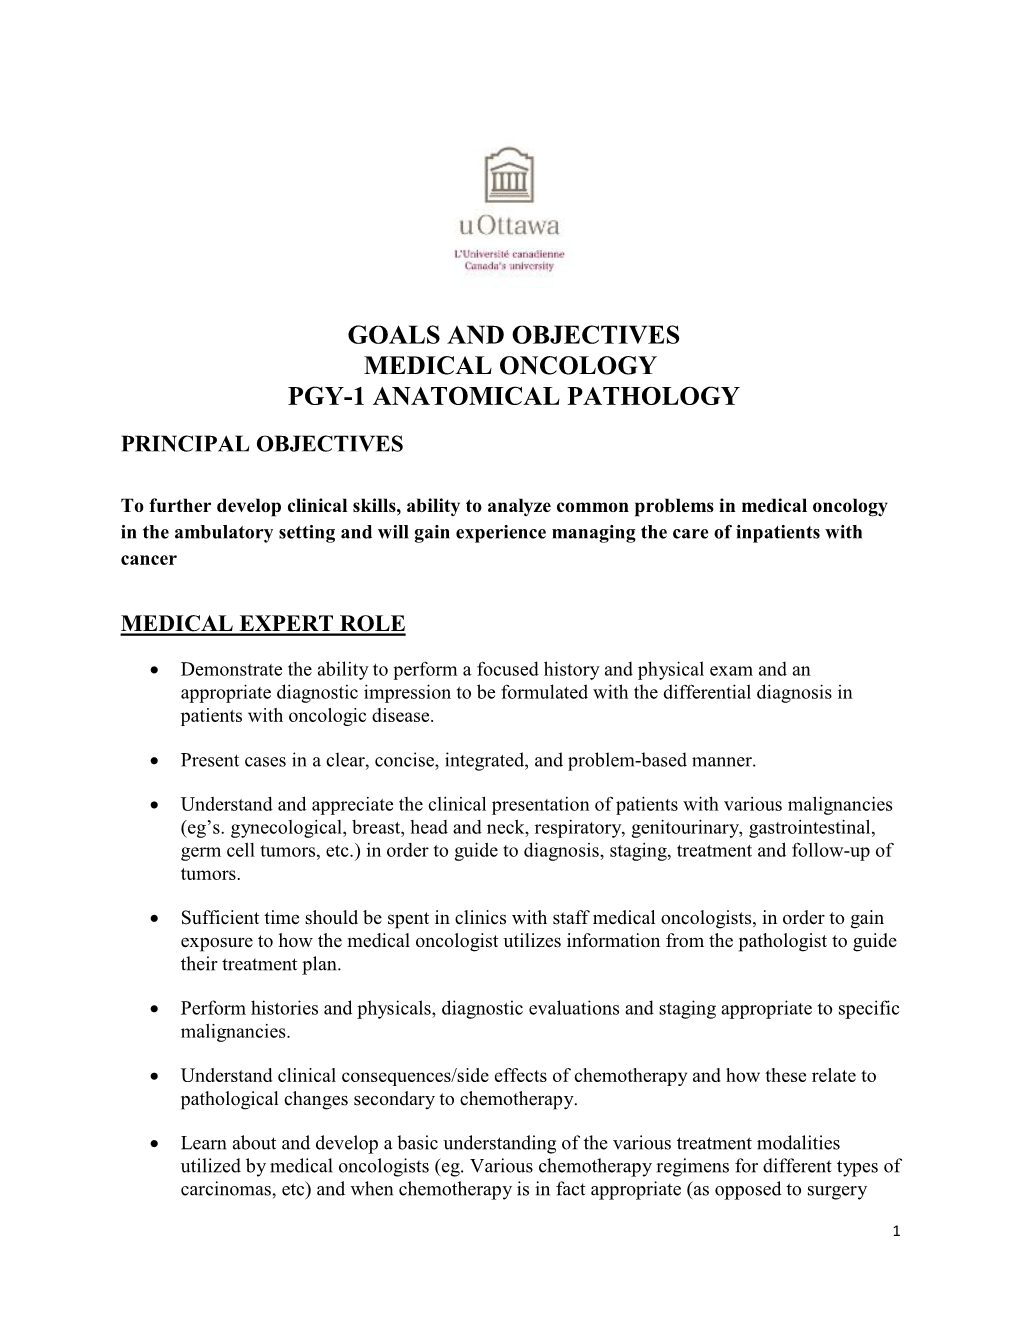 Goals and Objectives Medical Oncology Pgy-1 Anatomical Pathology Principal Objectives